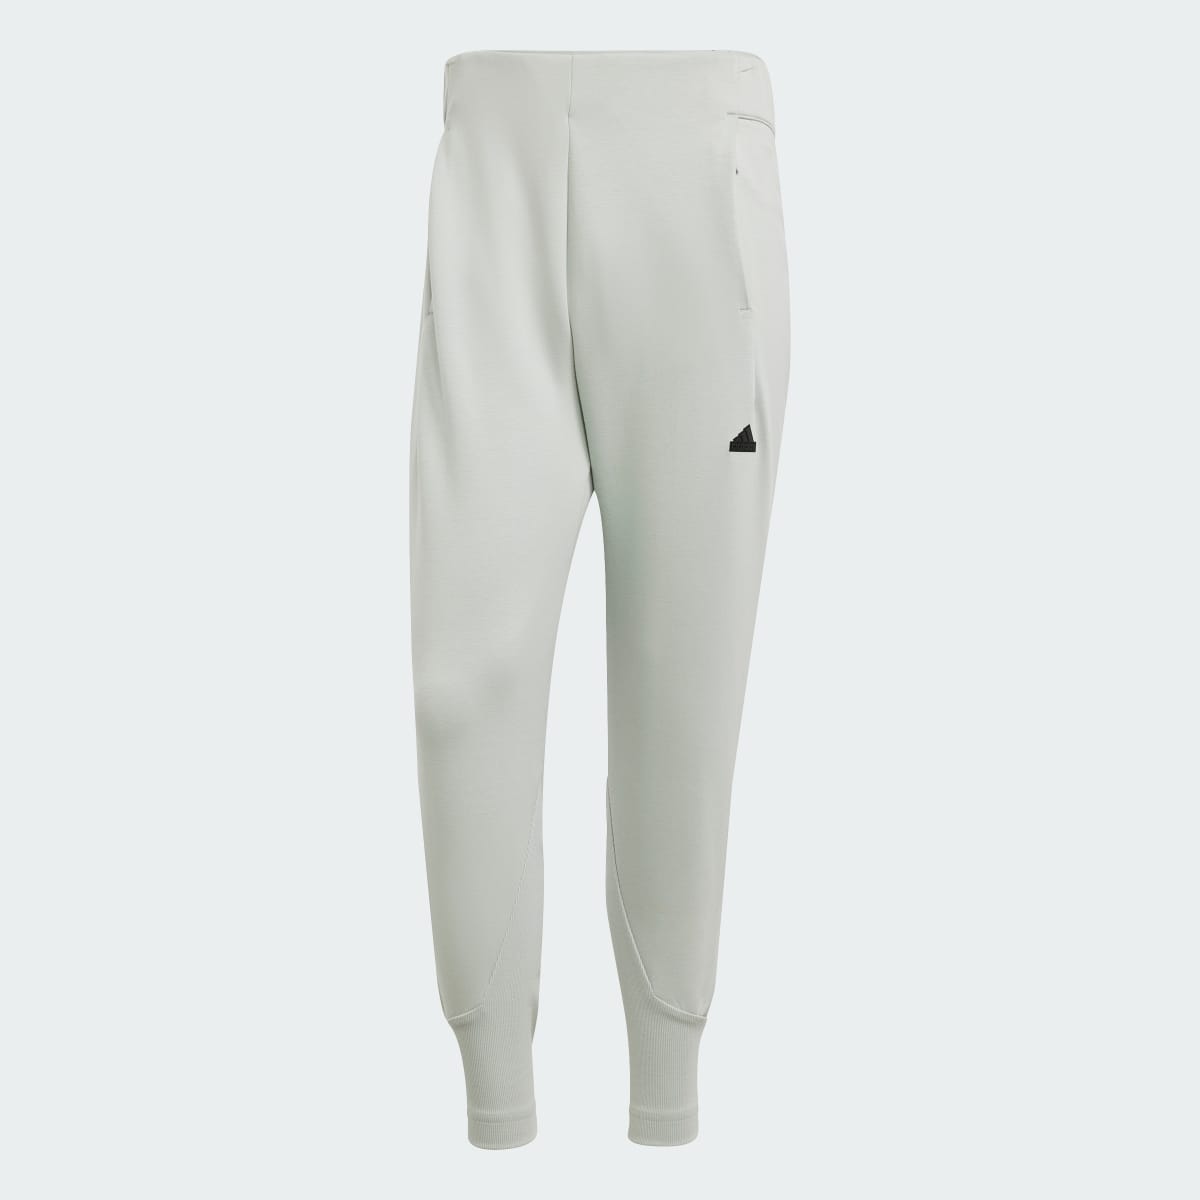 Adidas Z.N.E. Tracksuit Bottoms. 4